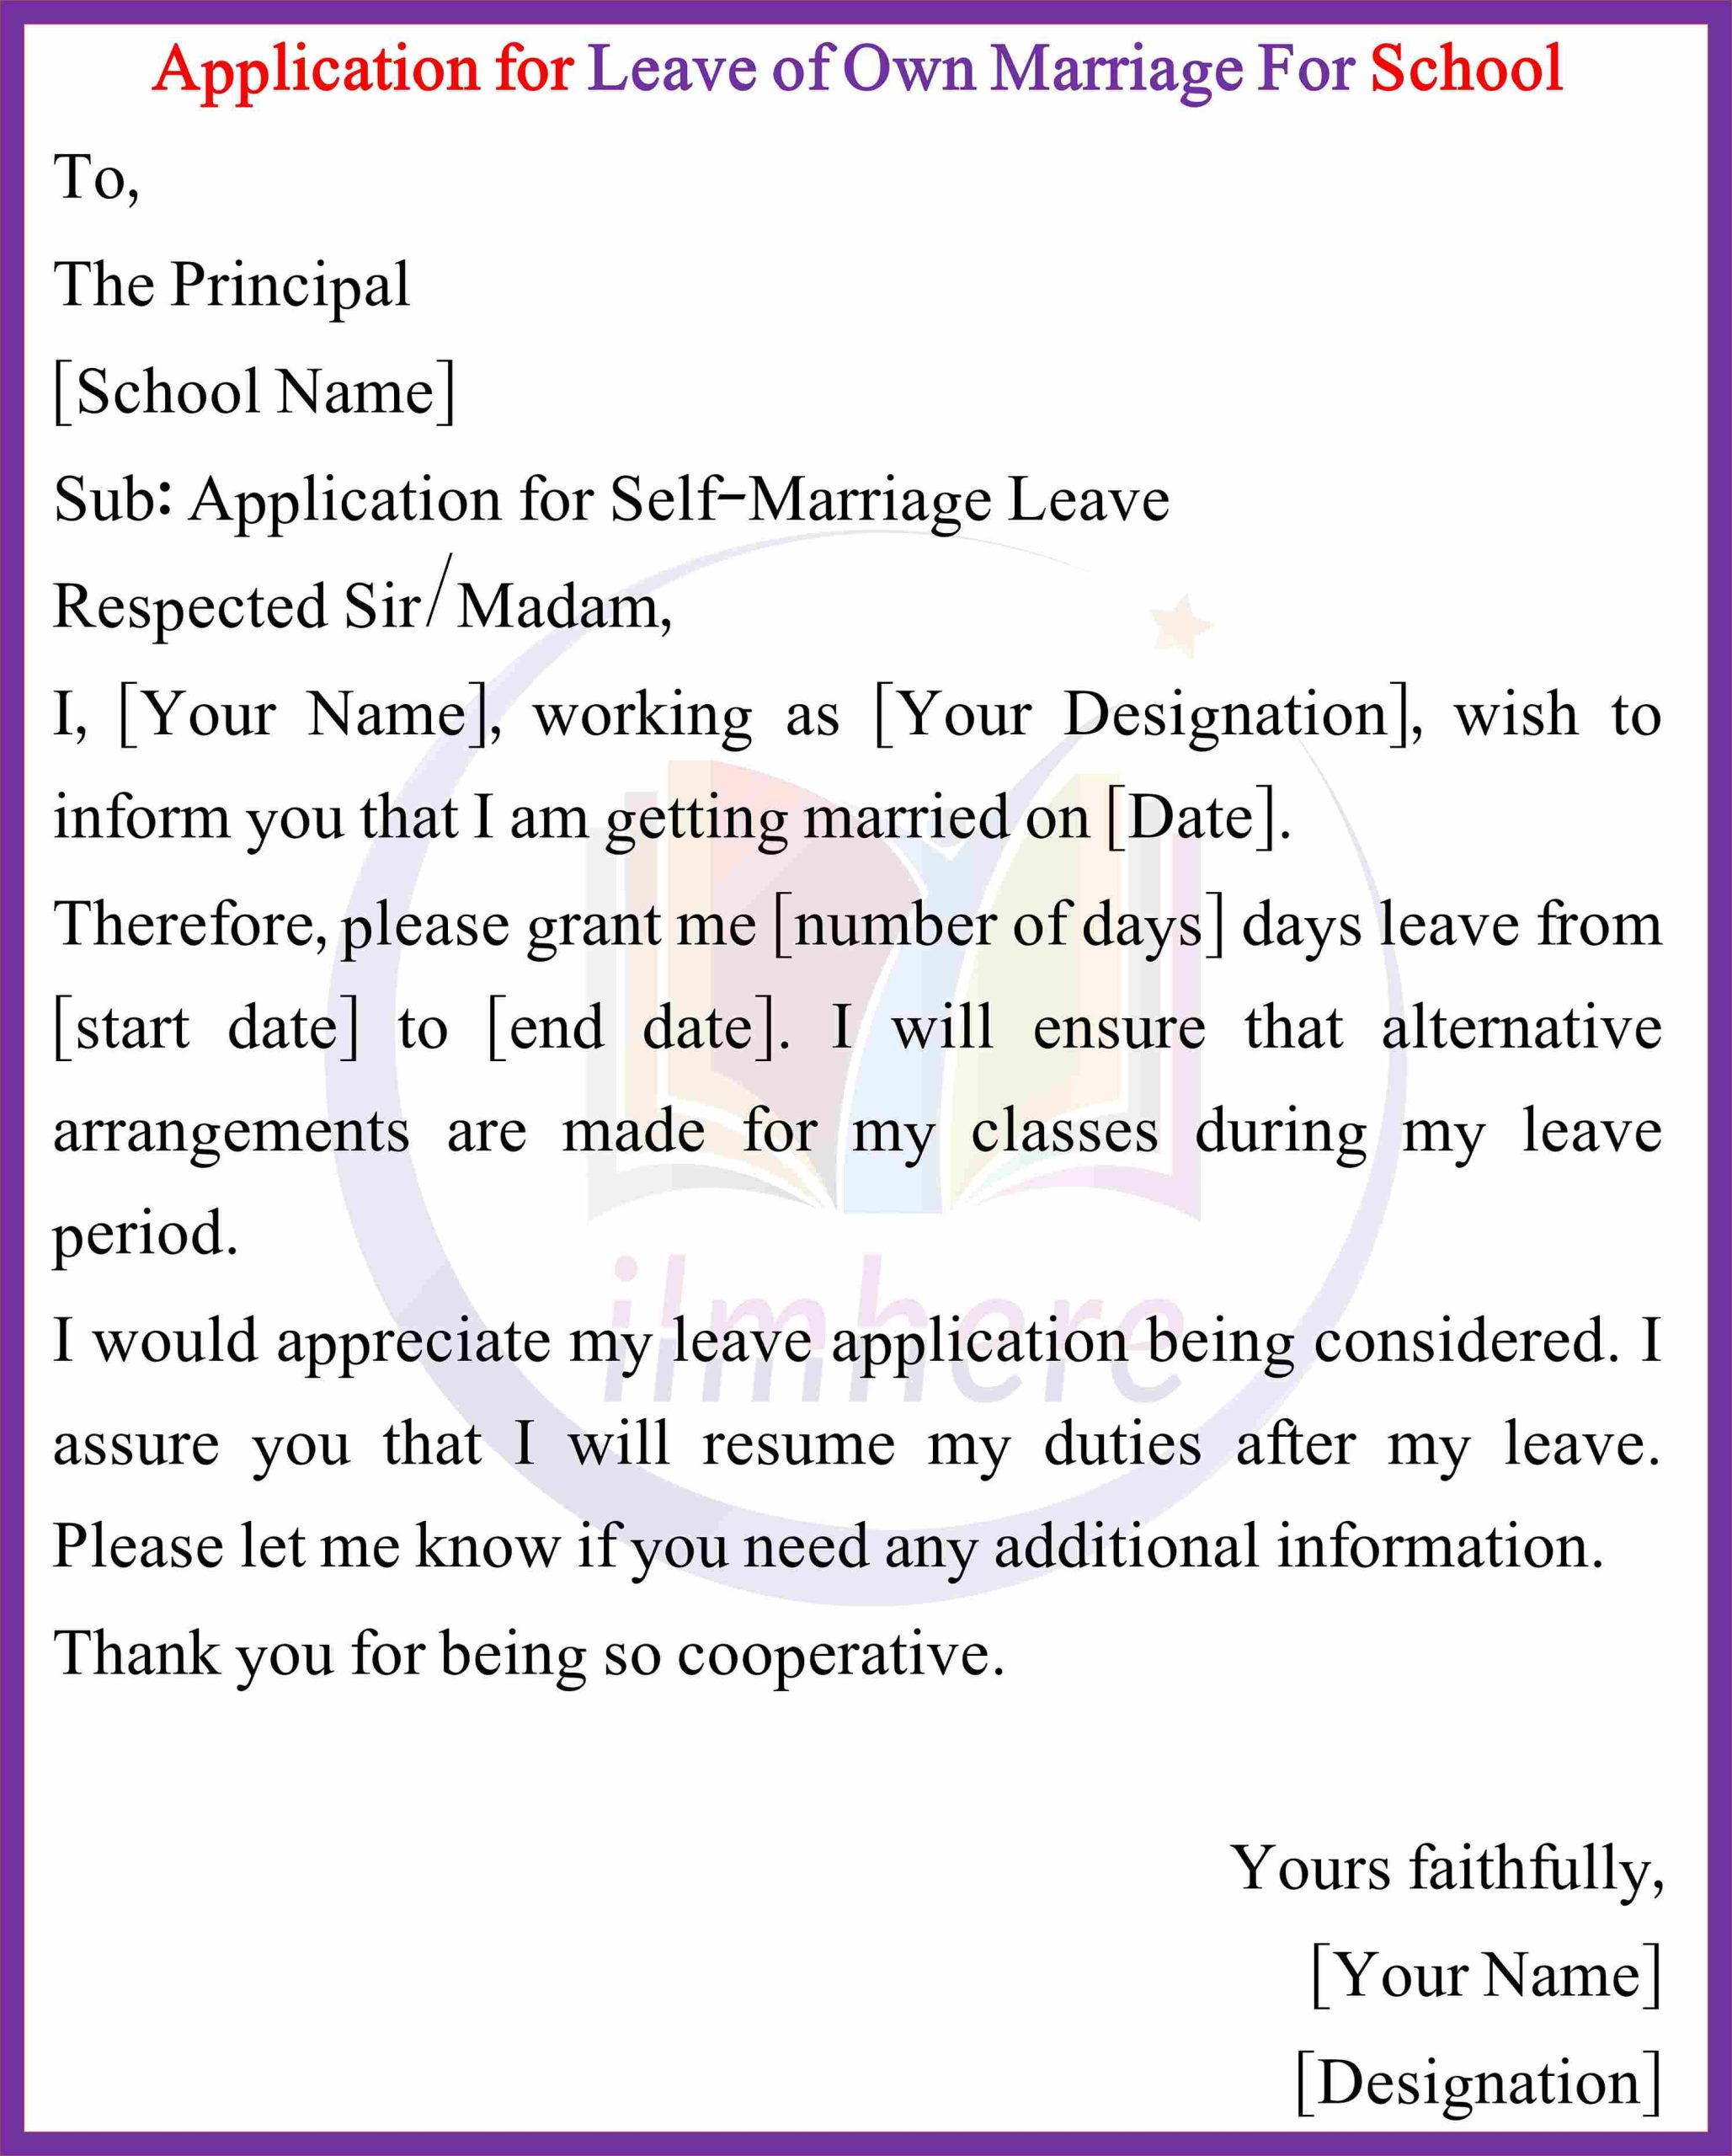 Self-marriage leave application For School